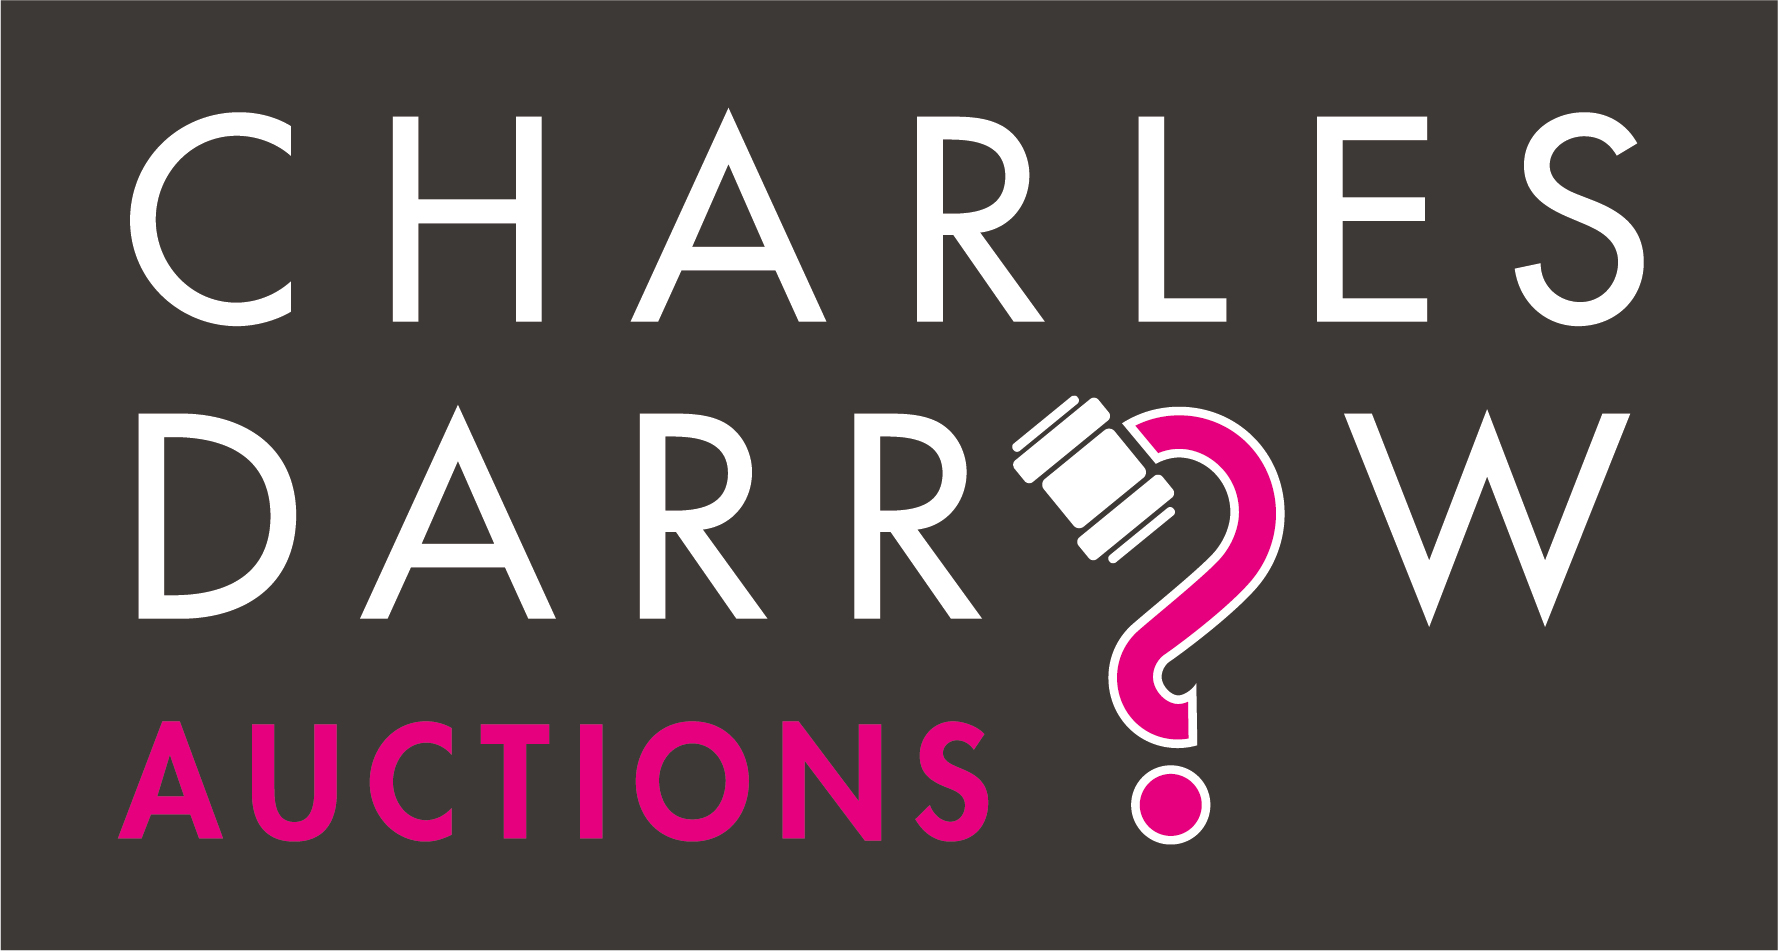 Charles Darrow Network Auctions on 01271 321122